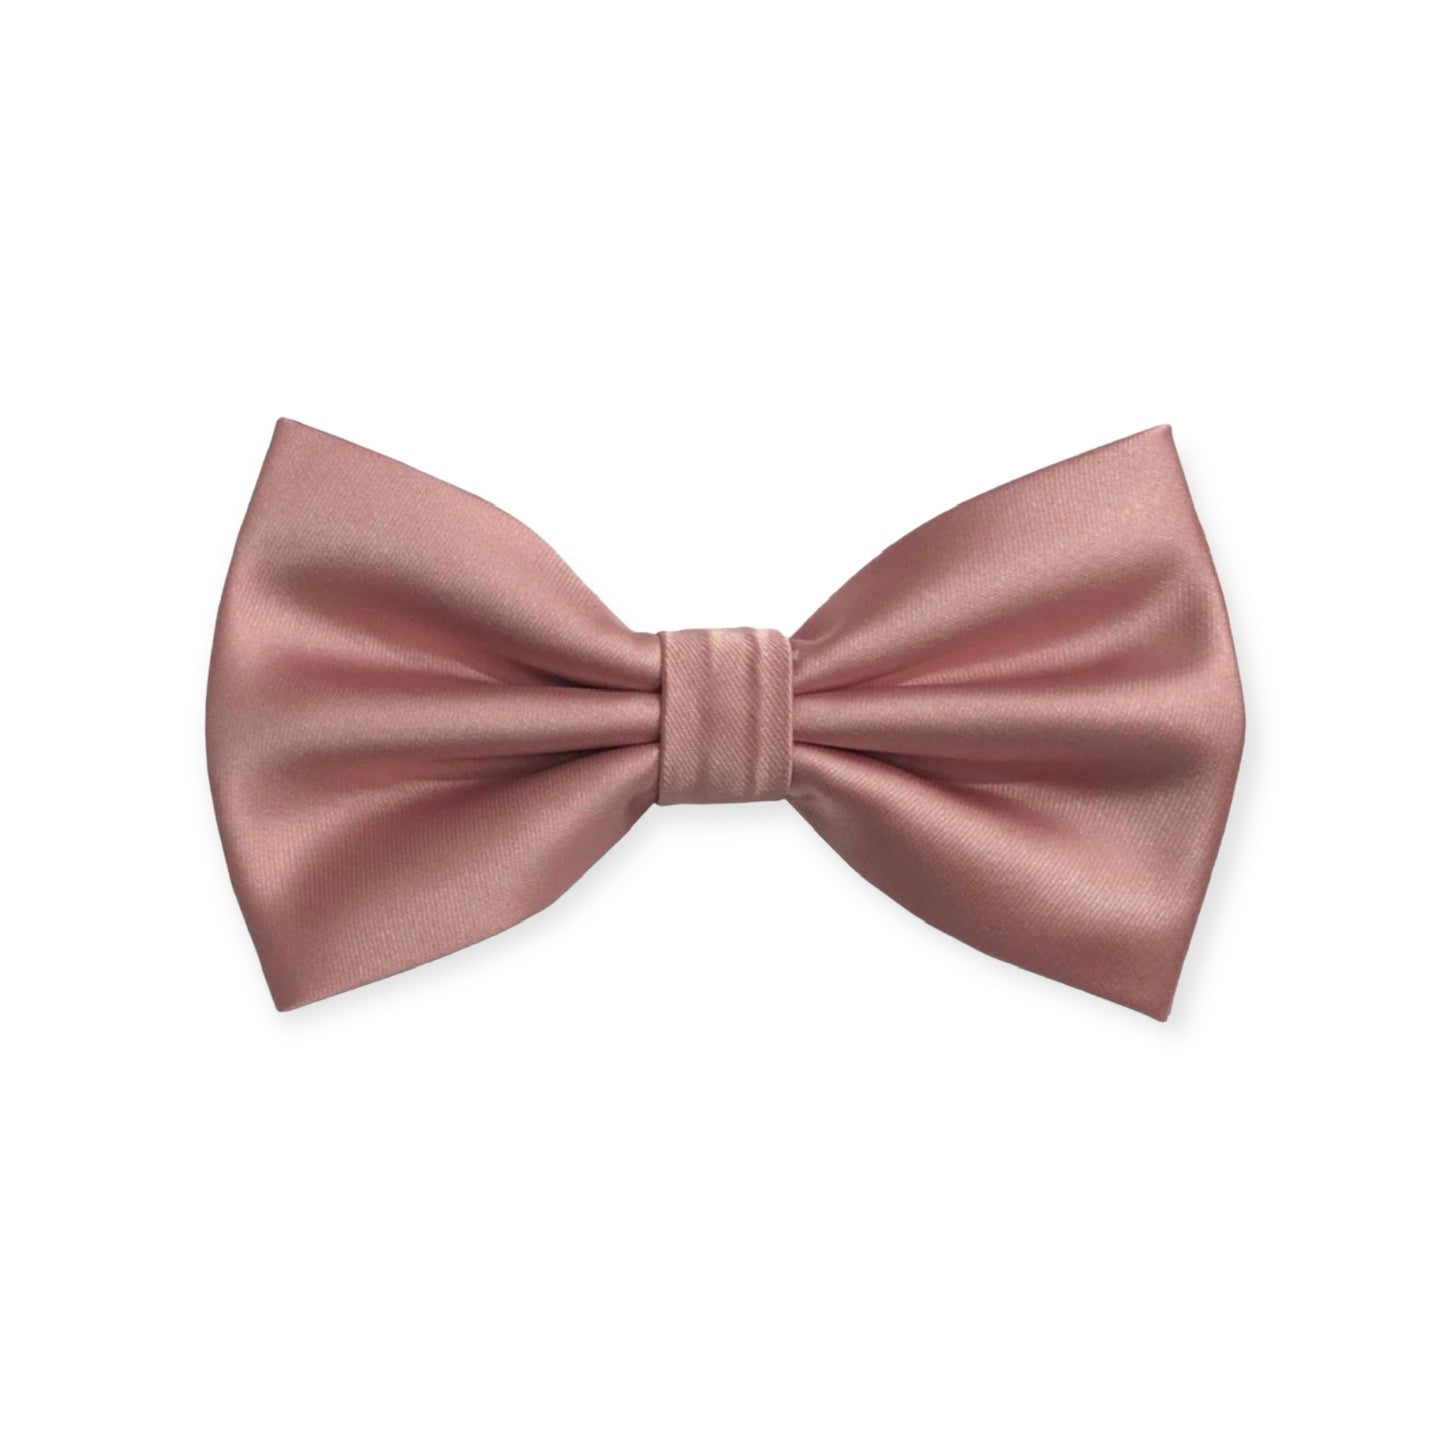 Solid Dusty Rose Bow Tie and Hanky